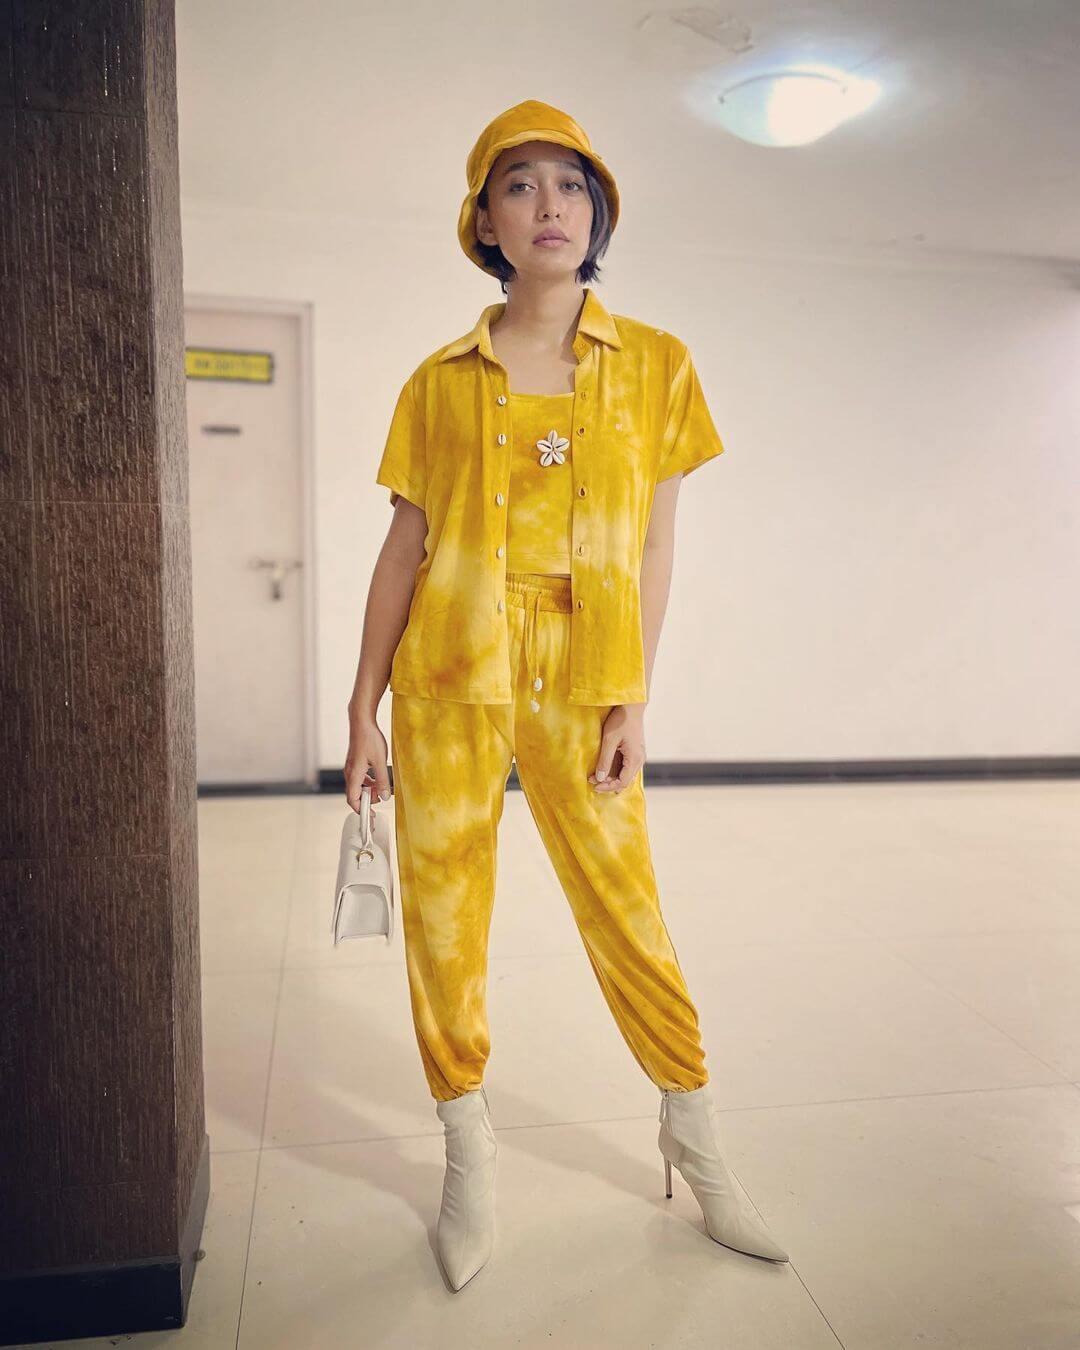 Vibrant Yet Simple Look Sayani Just  Slay the Yellow Co-Ord Set Sayani Gupta Hot and Dazzling Outfit Looks